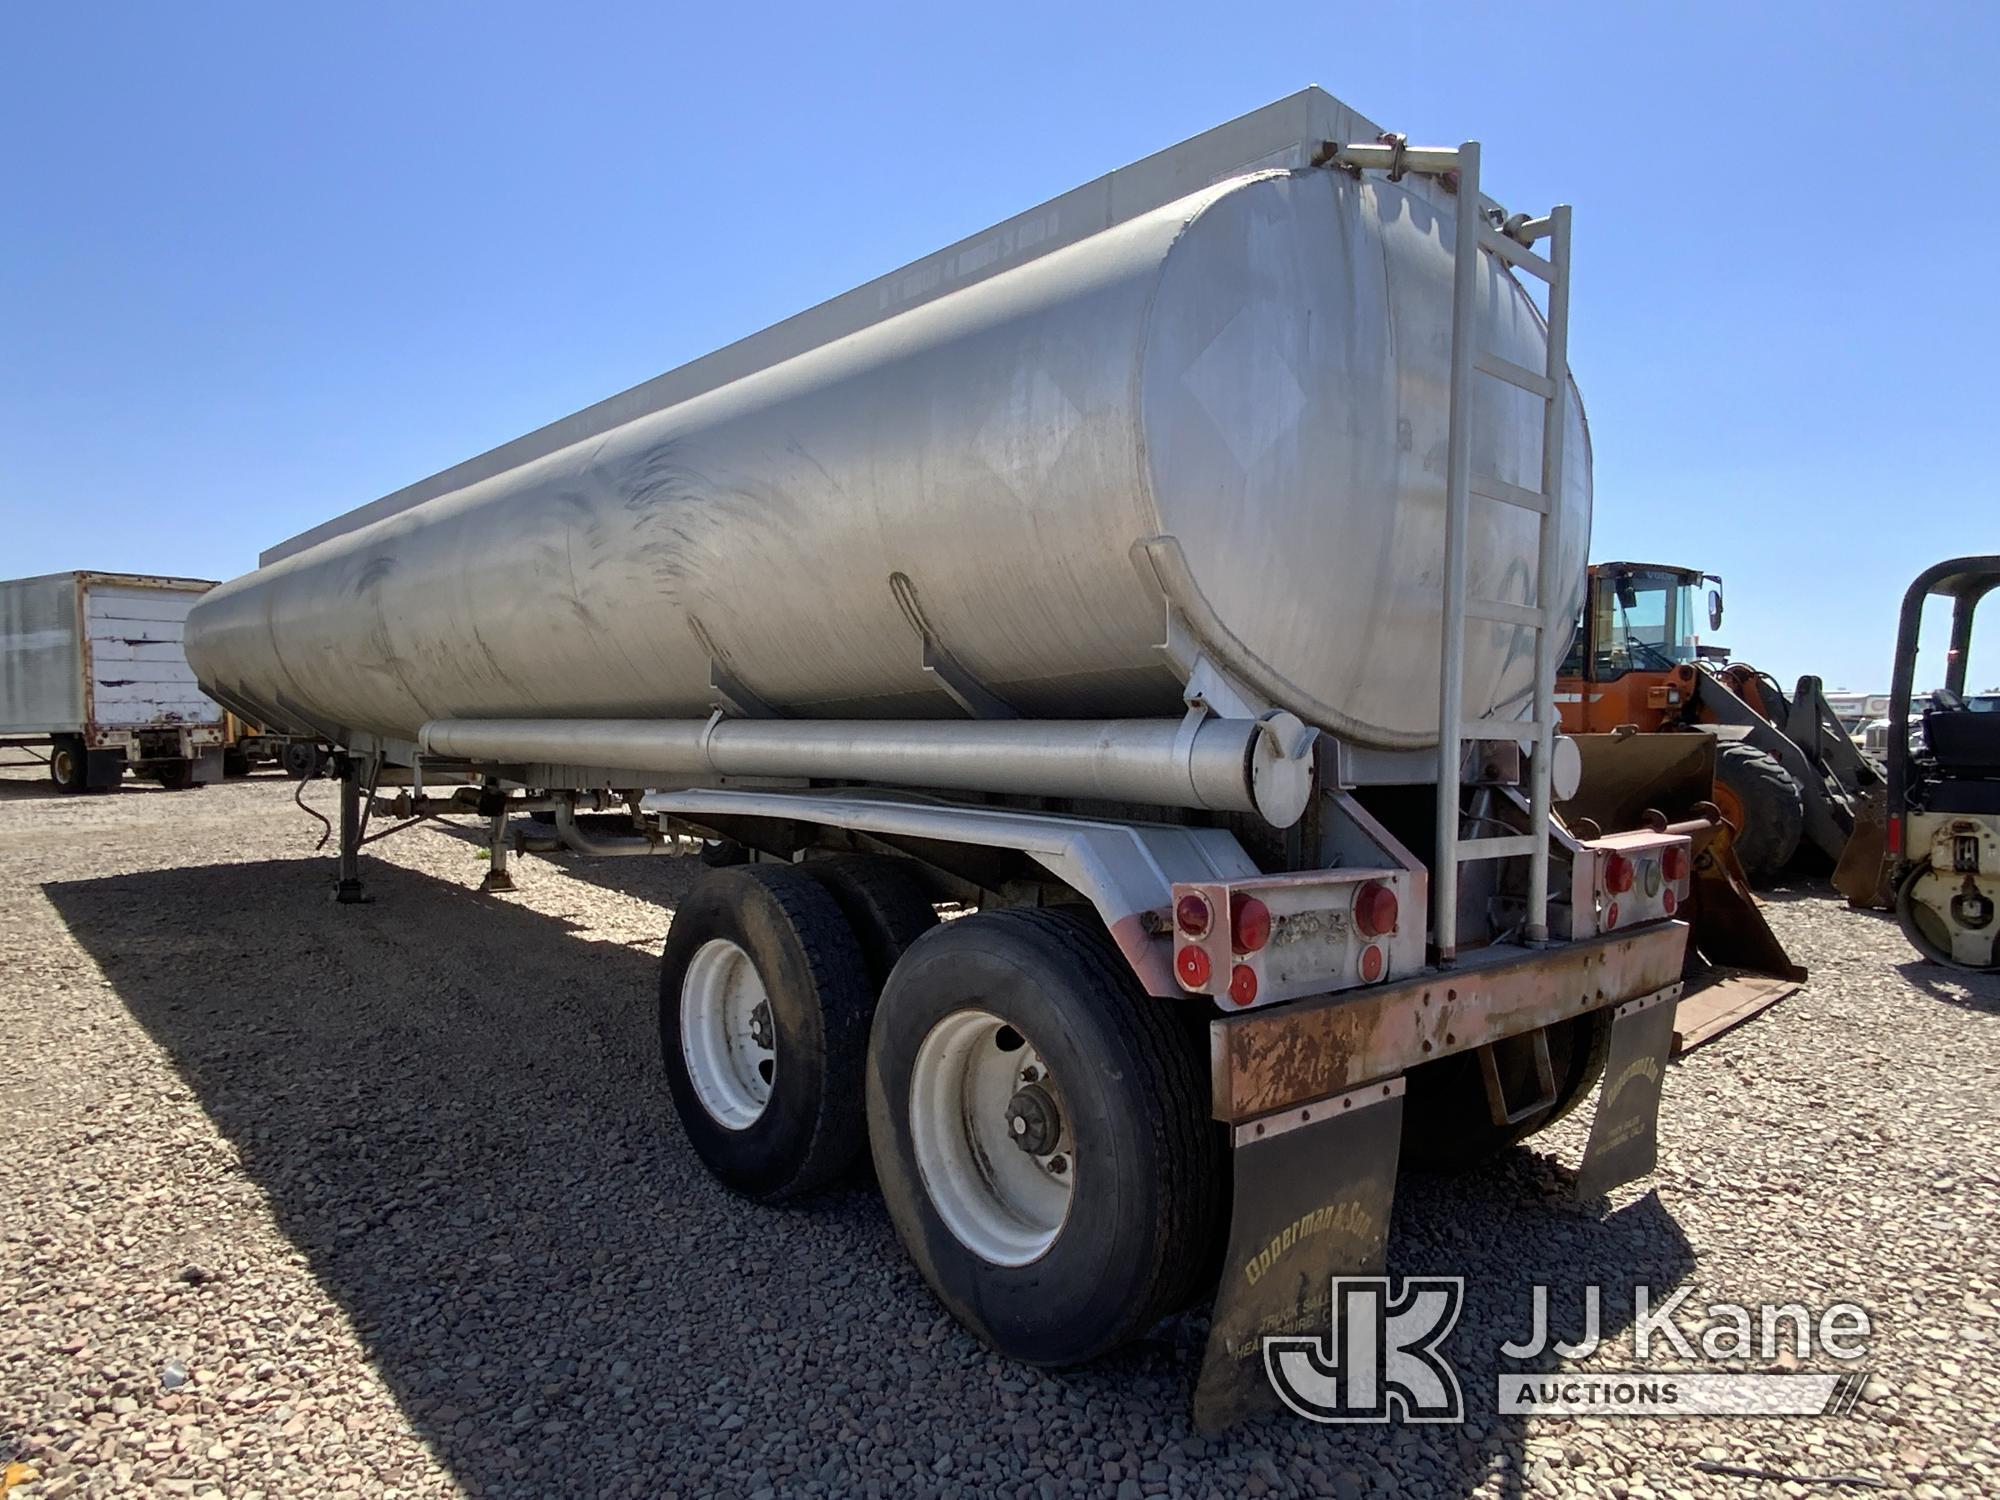 (Dixon, CA) 1975 SEMI WATER TANK TRAILER (Used) NOTE: This unit is being sold AS IS/WHERE IS via Tim